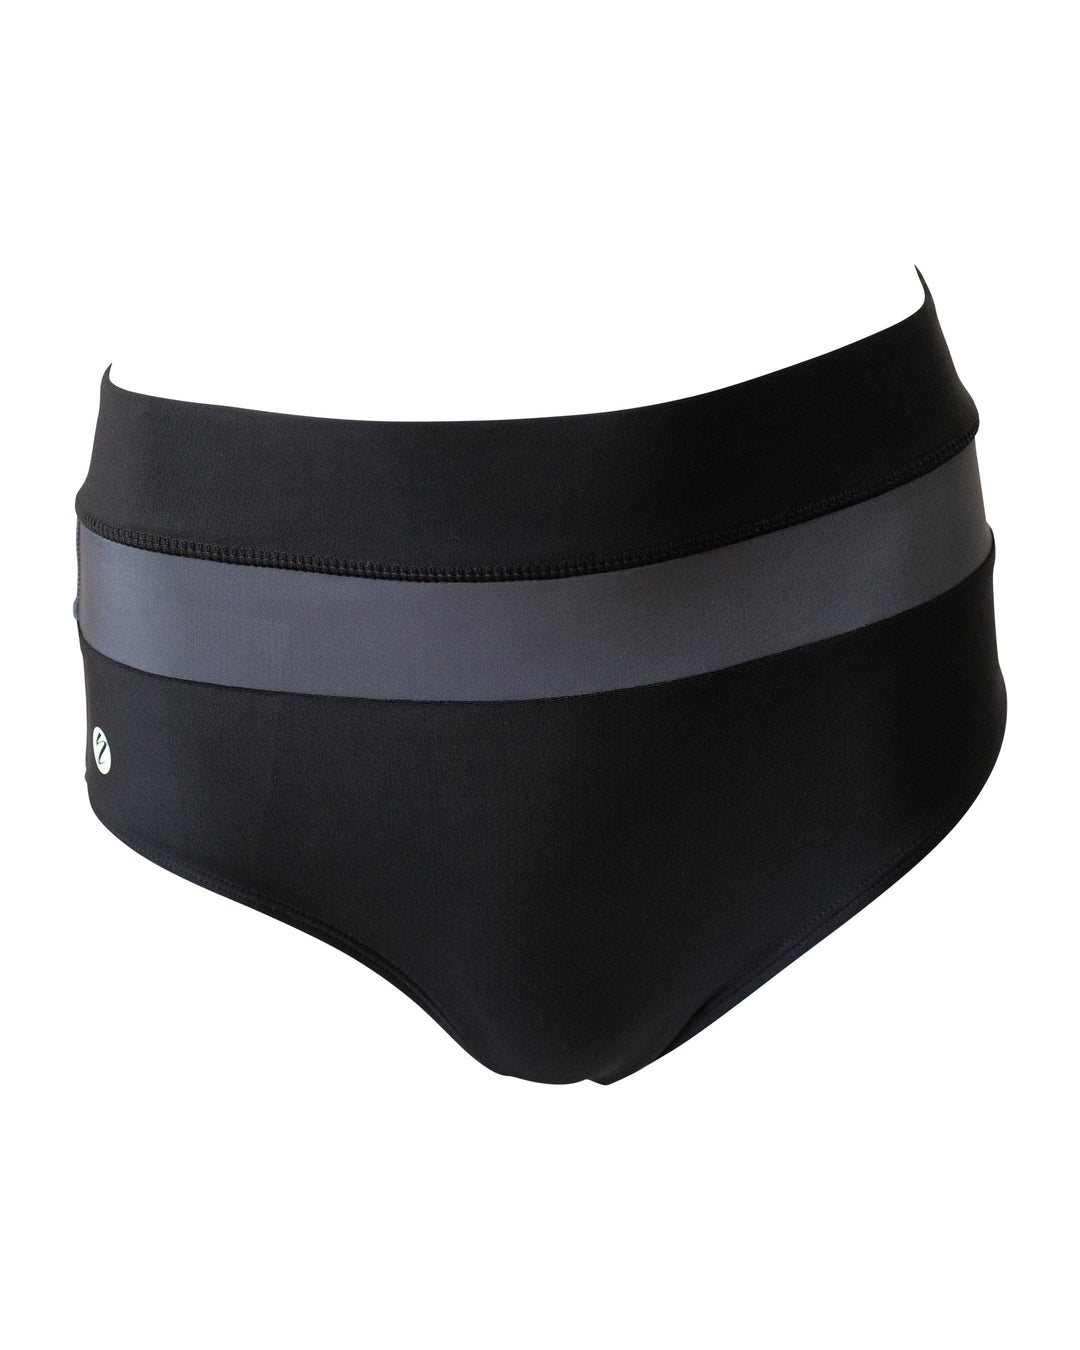 A flat lay image of black and grey color blocked high waisted swimsuit bottoms.